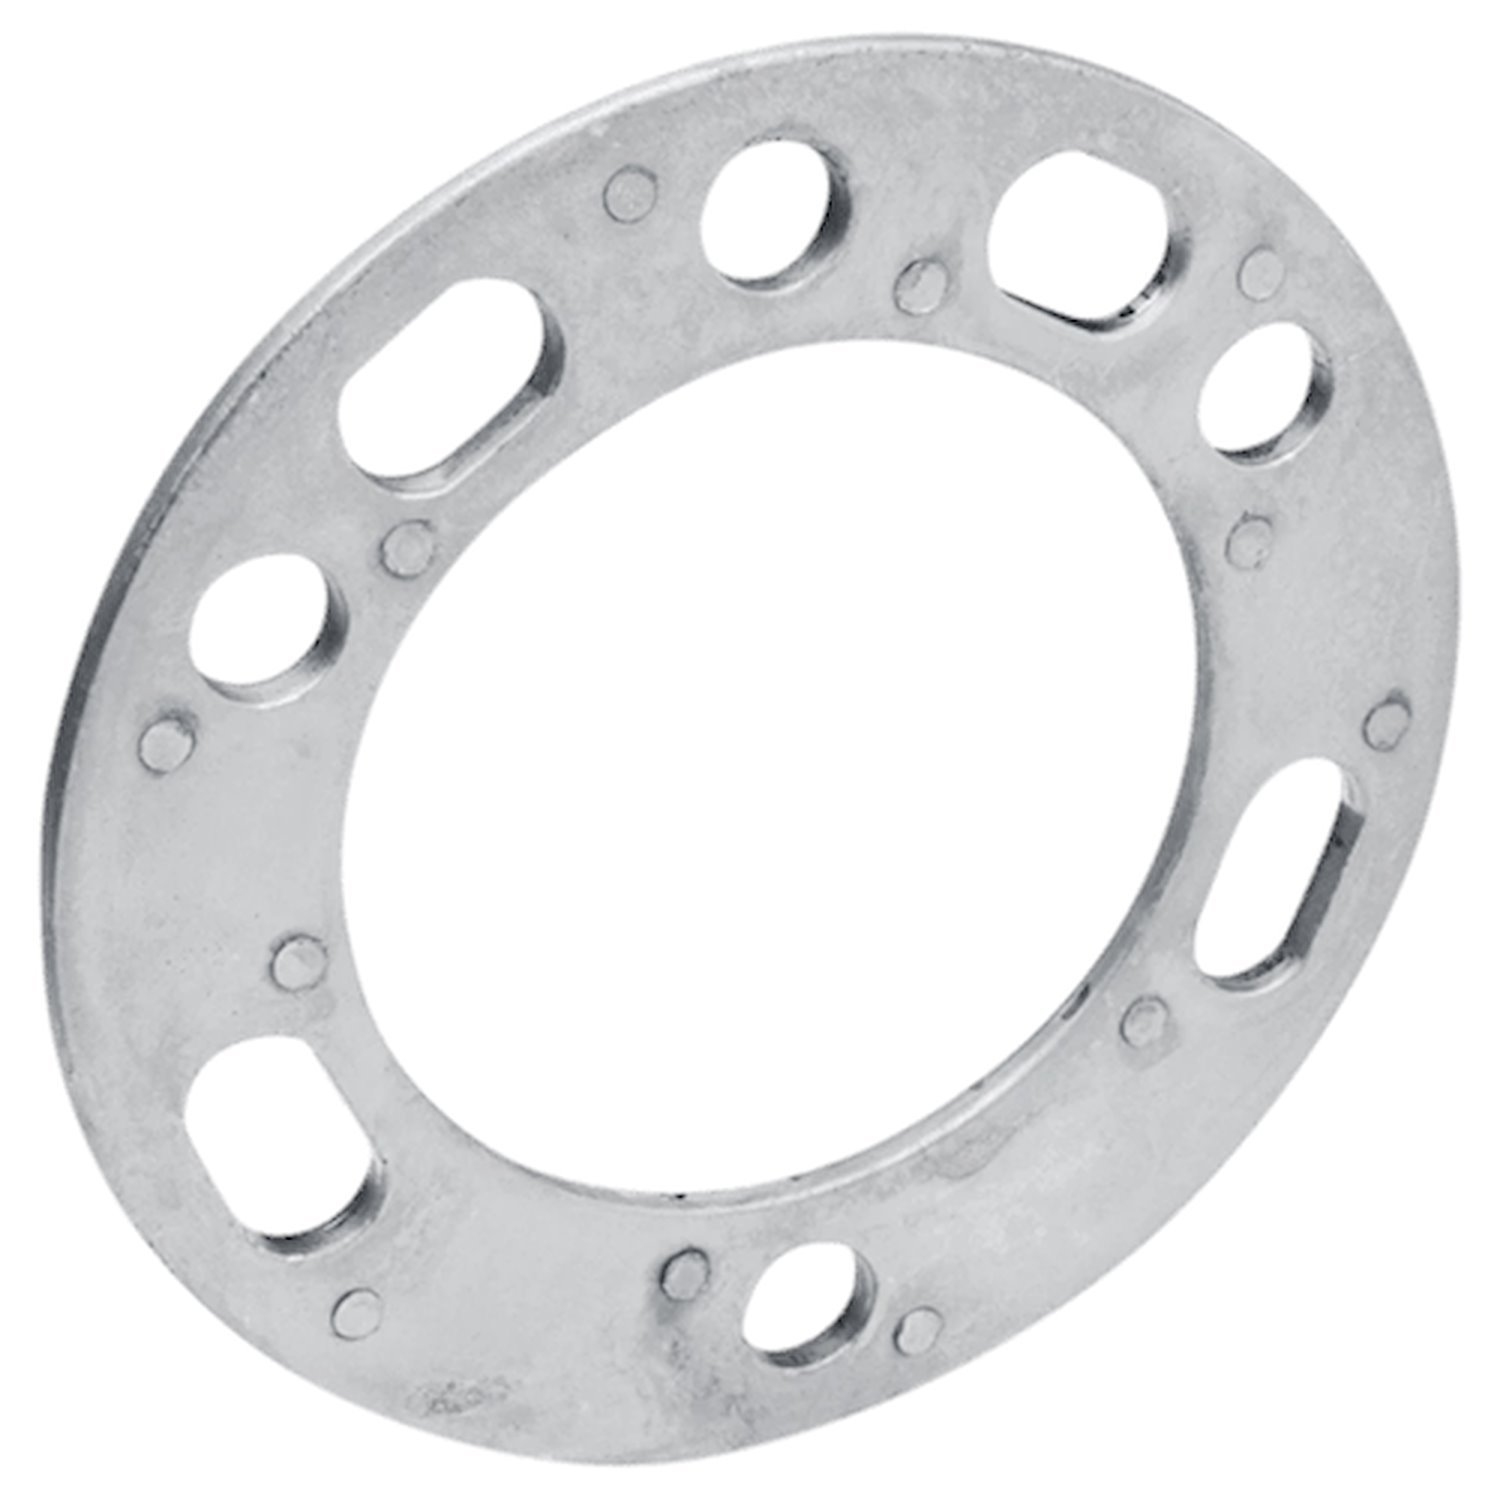 SP603 Wheel Spacer, 5 x 5.5 / 6 x 5.5, 1/4" Thick